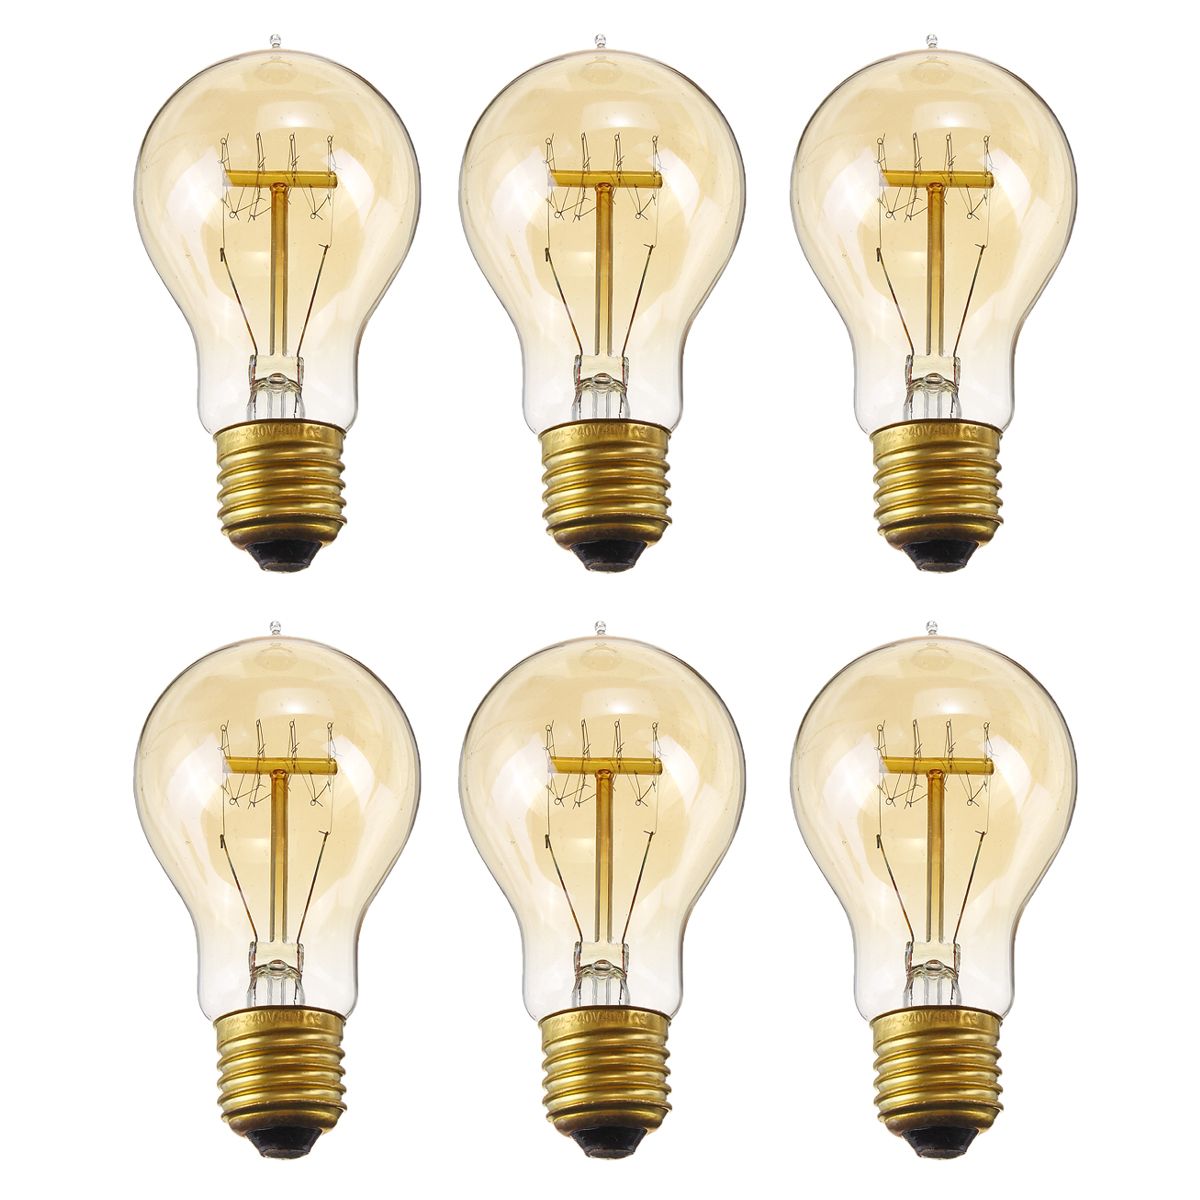 6PCS-E27-A19-40W-Warm-White-Dimmable-Incandescent-Edison-Light-Bulb-for-Indoor-Home-Garden-AC220V-1512029